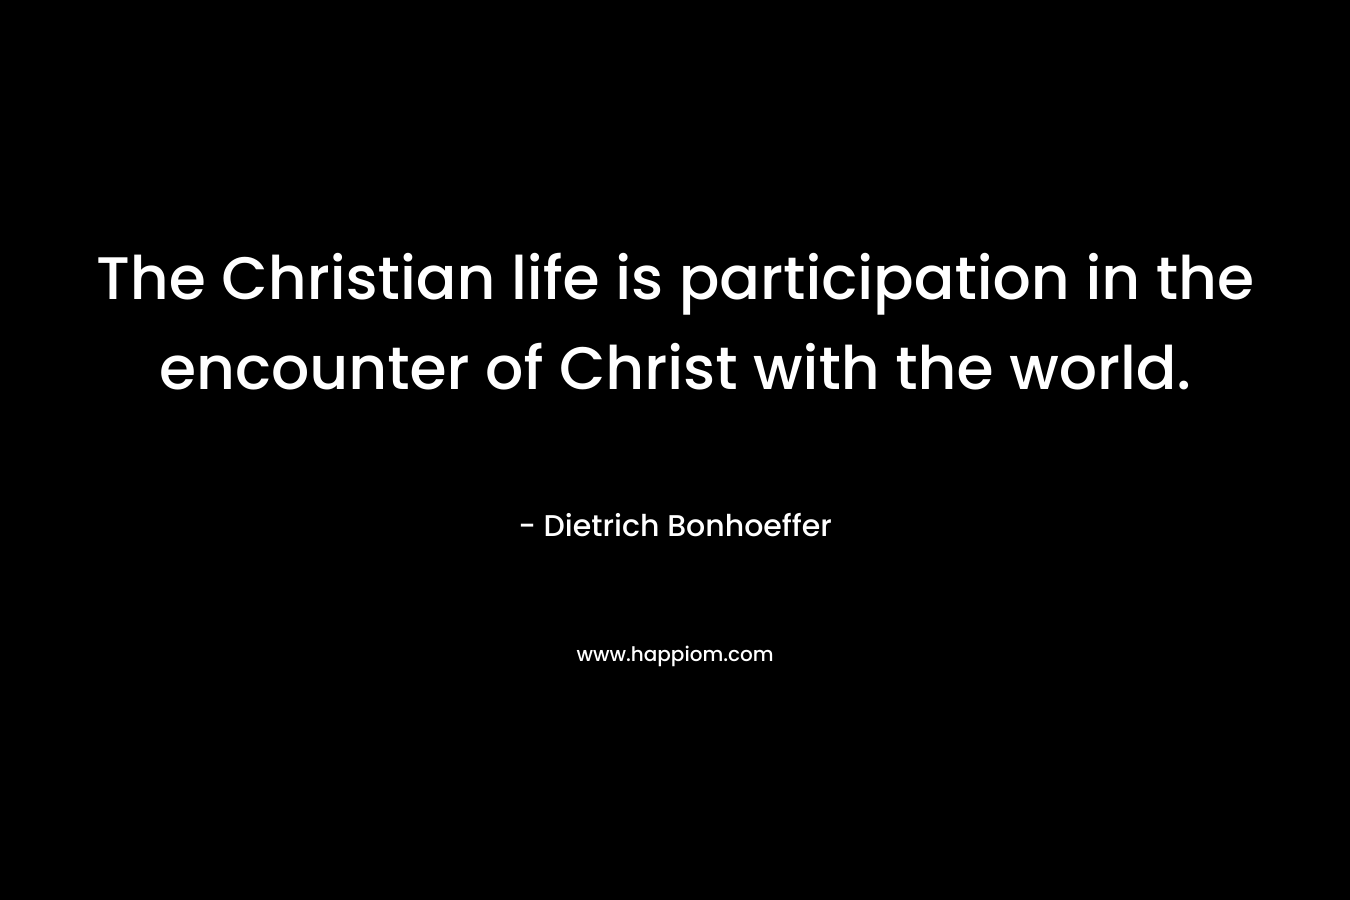 The Christian life is participation in the encounter of Christ with the world.